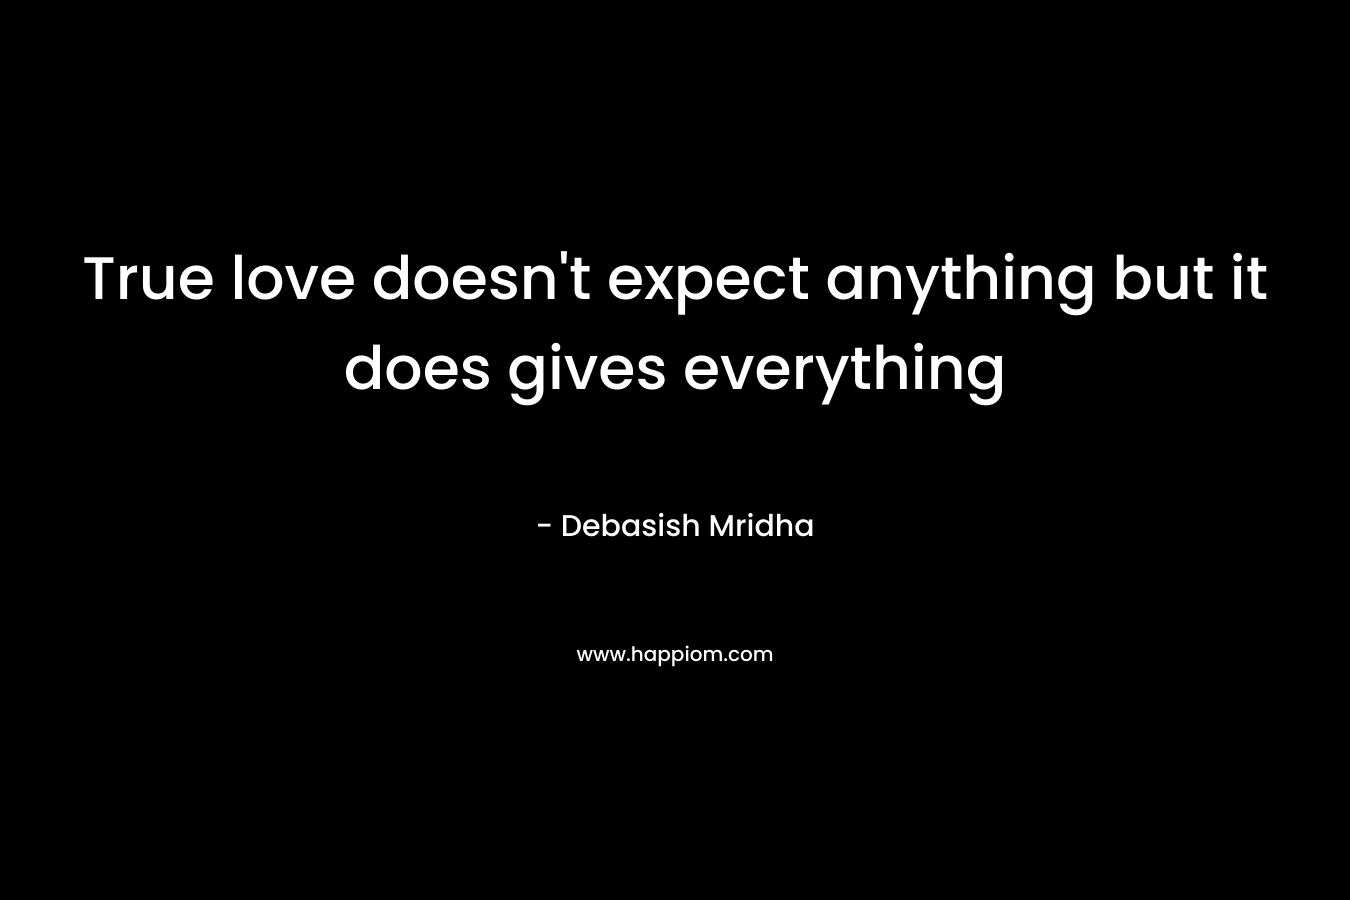 True love doesn't expect anything but it does gives everything